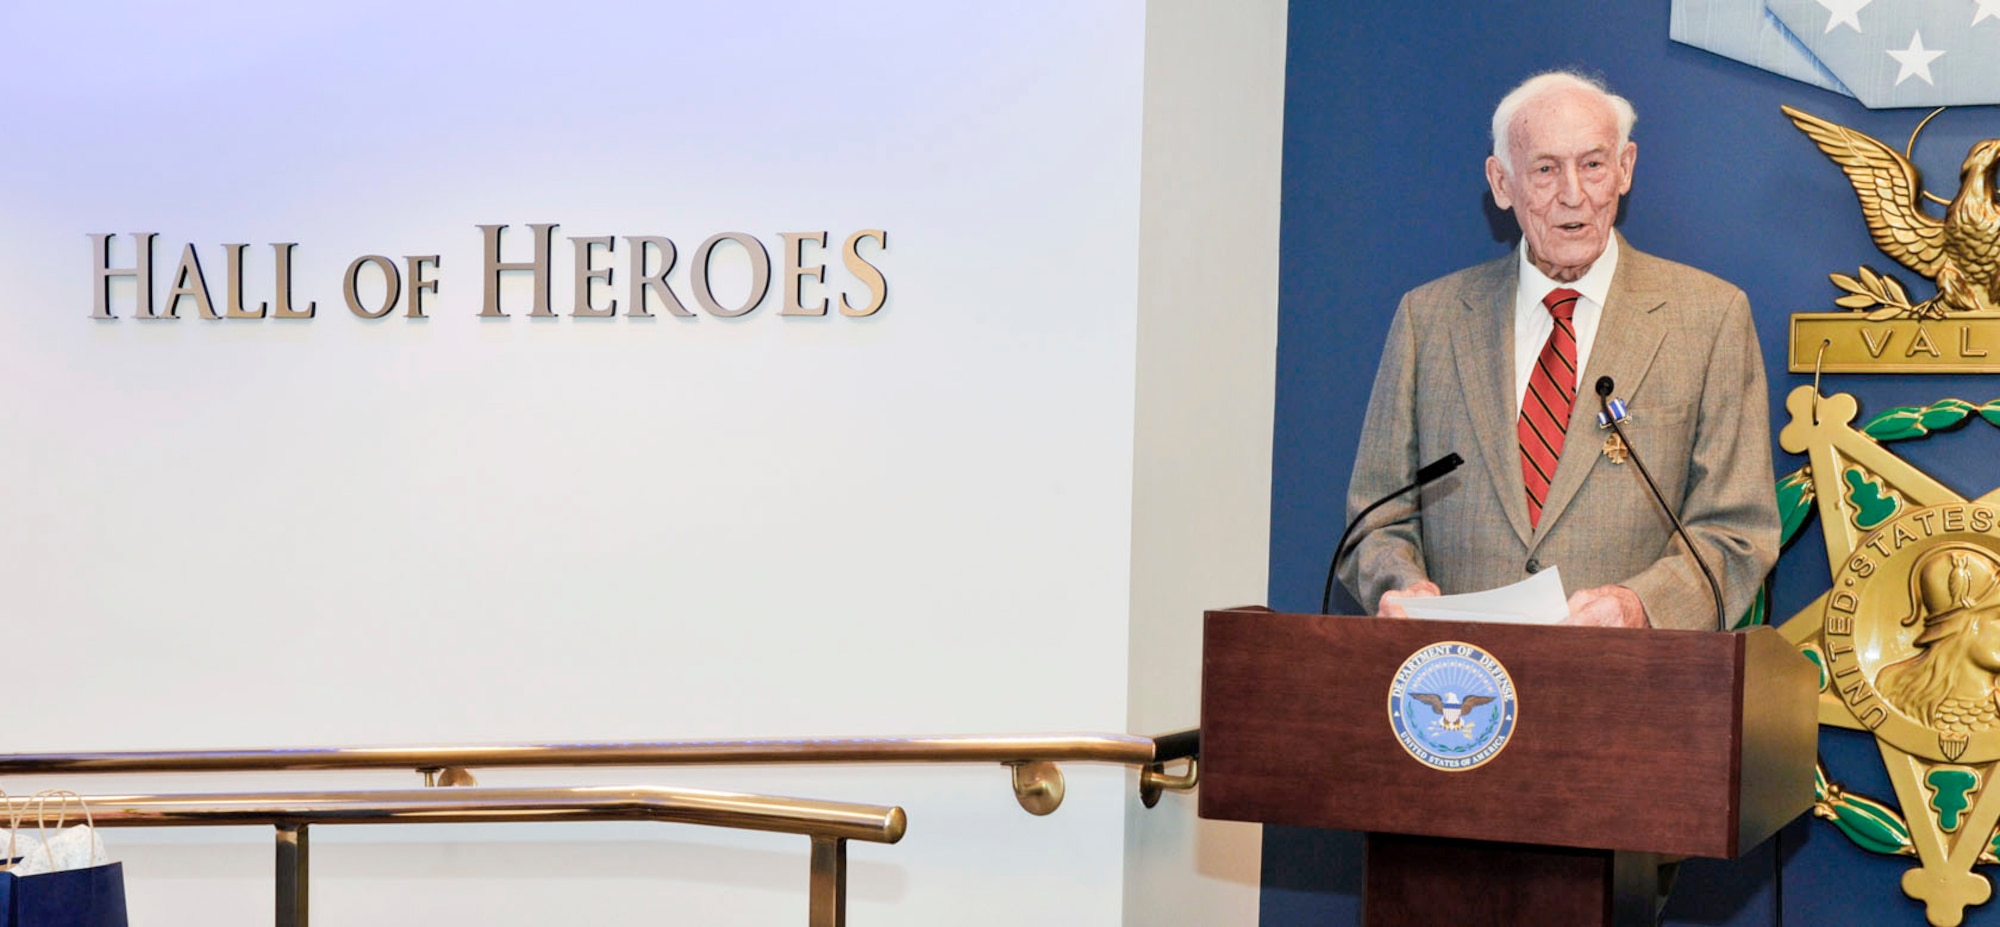 Retired Col. Claude M. Schonberger addresses an audience following the presentation of his Distinguished Flying Cross July 19, 2010, in the Pentagon's Hall of Heroes. He received the award for a mission during World War II. (U.S. Air Force photo/Michael Pausic)